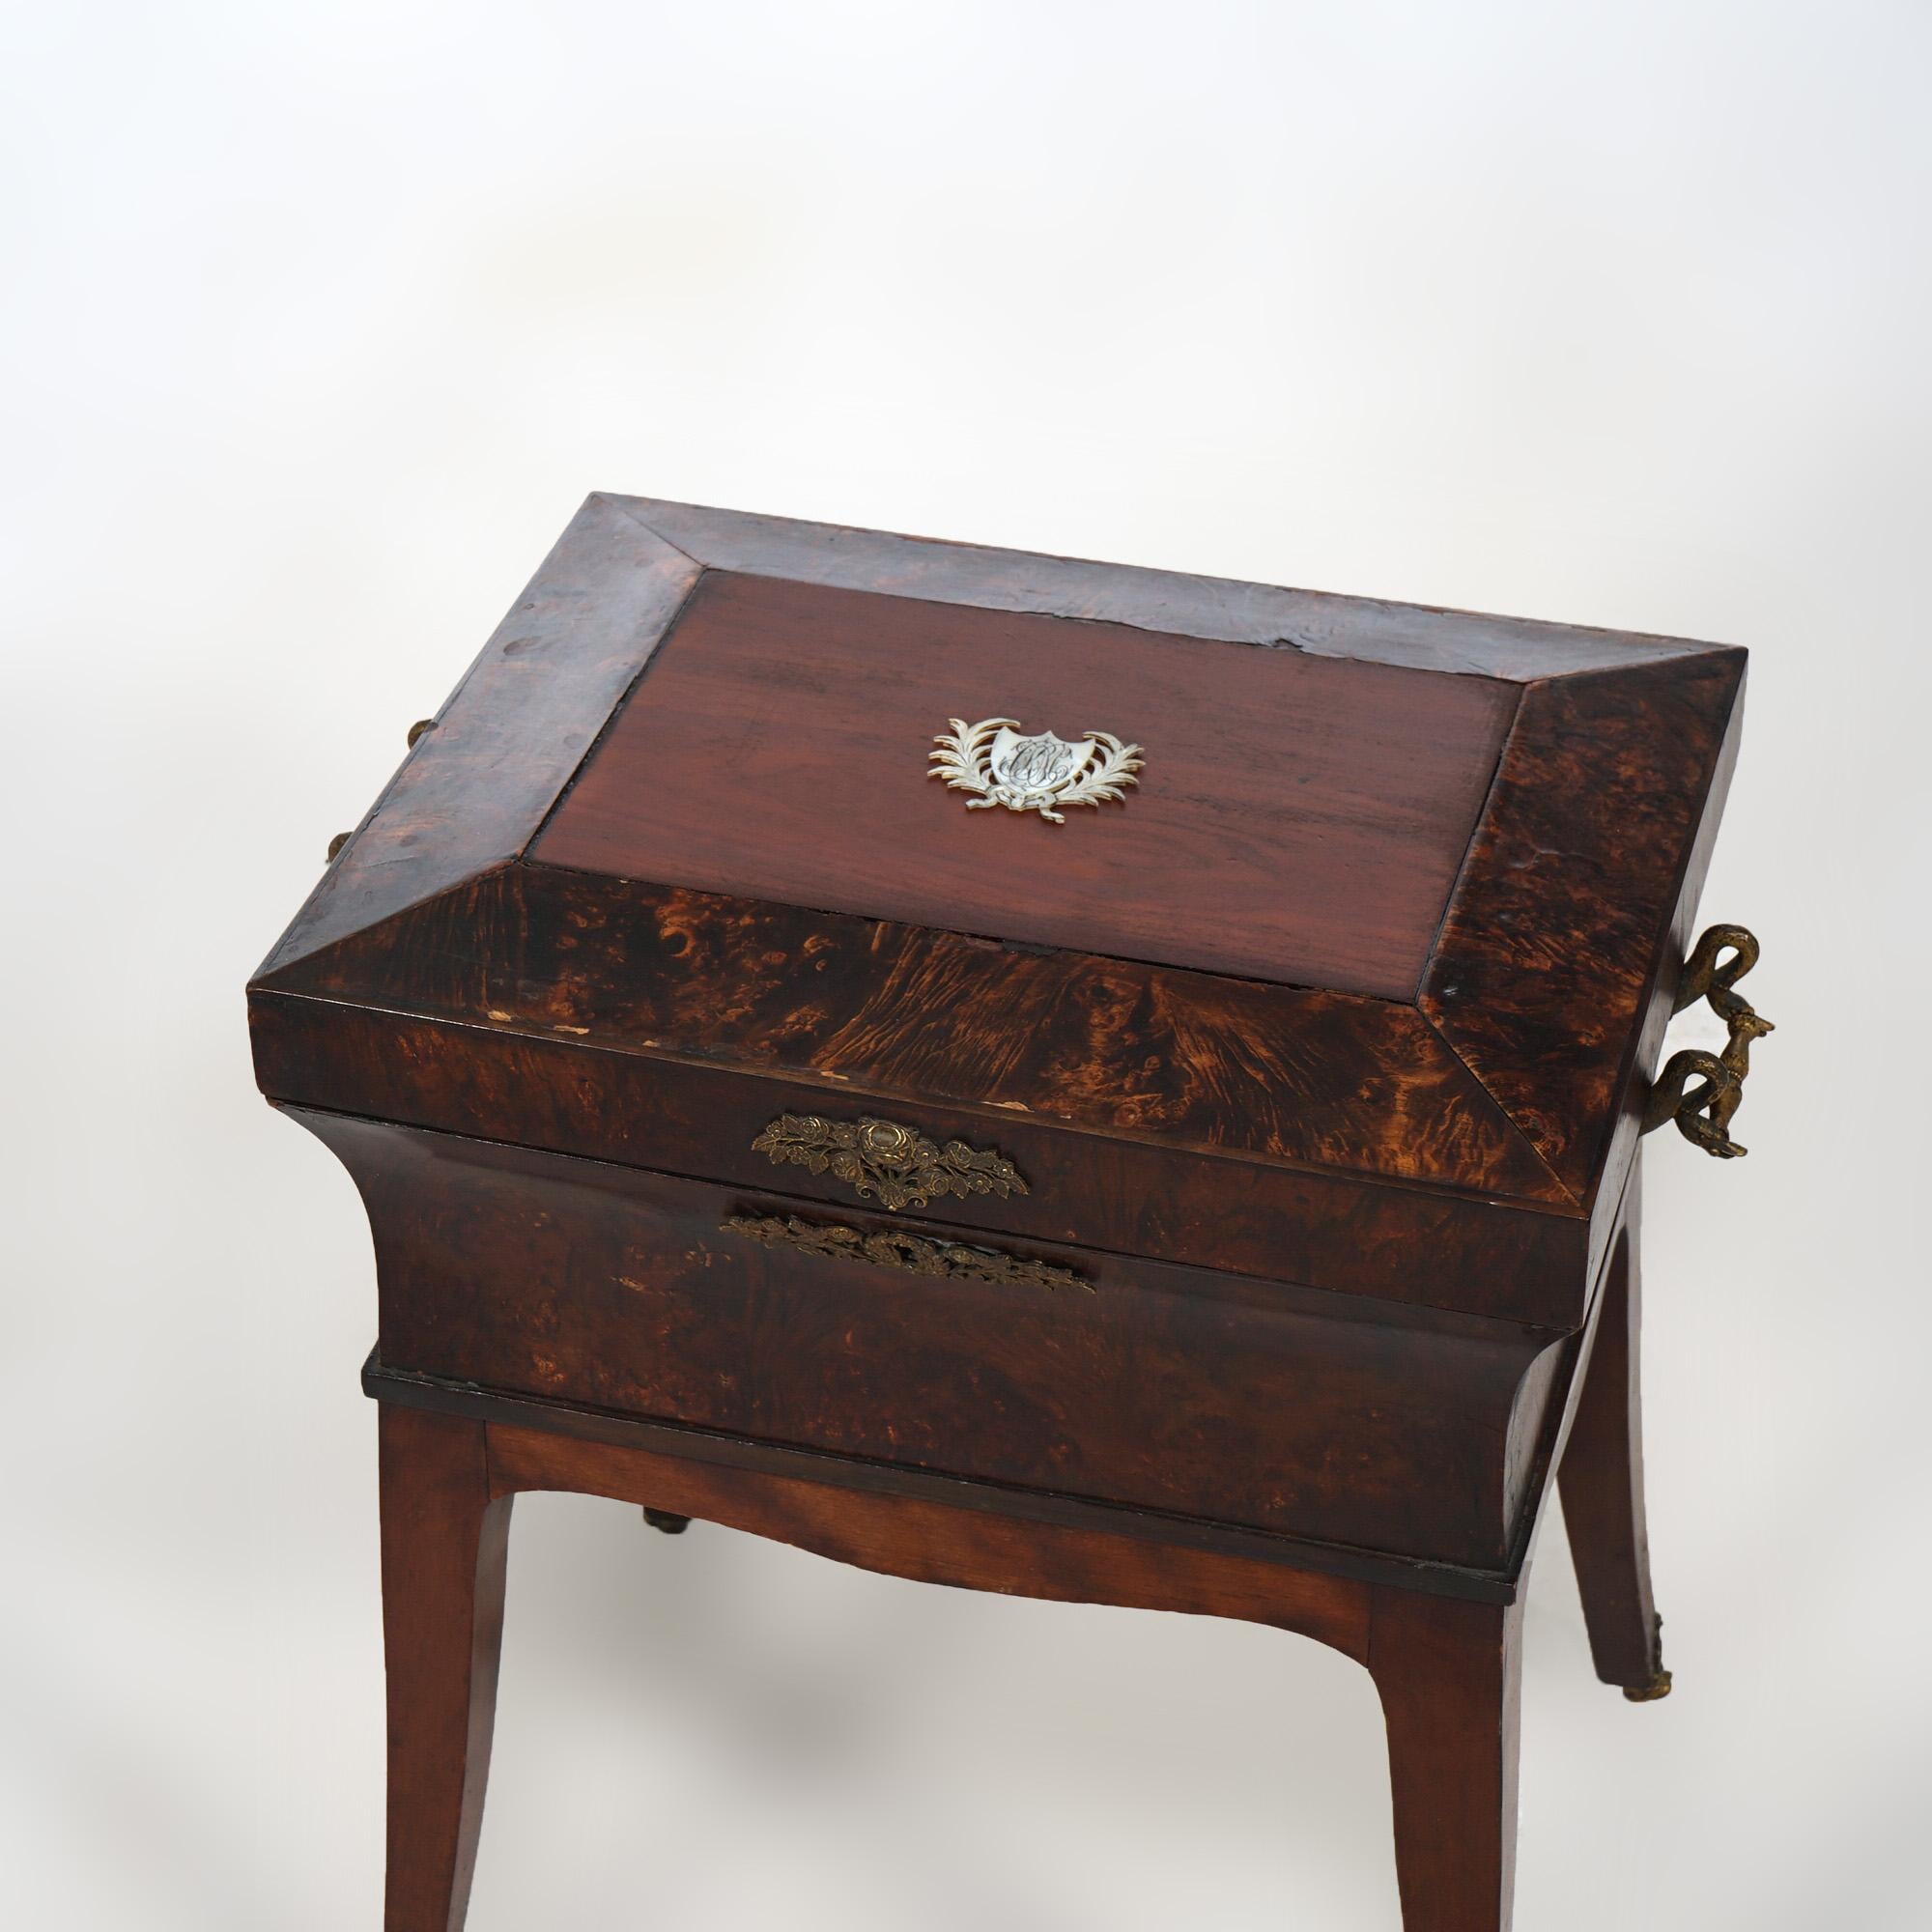 Antique French Louis XVI Inlaid Olive Wood Sewing Box or Jewel Chest c1800 2